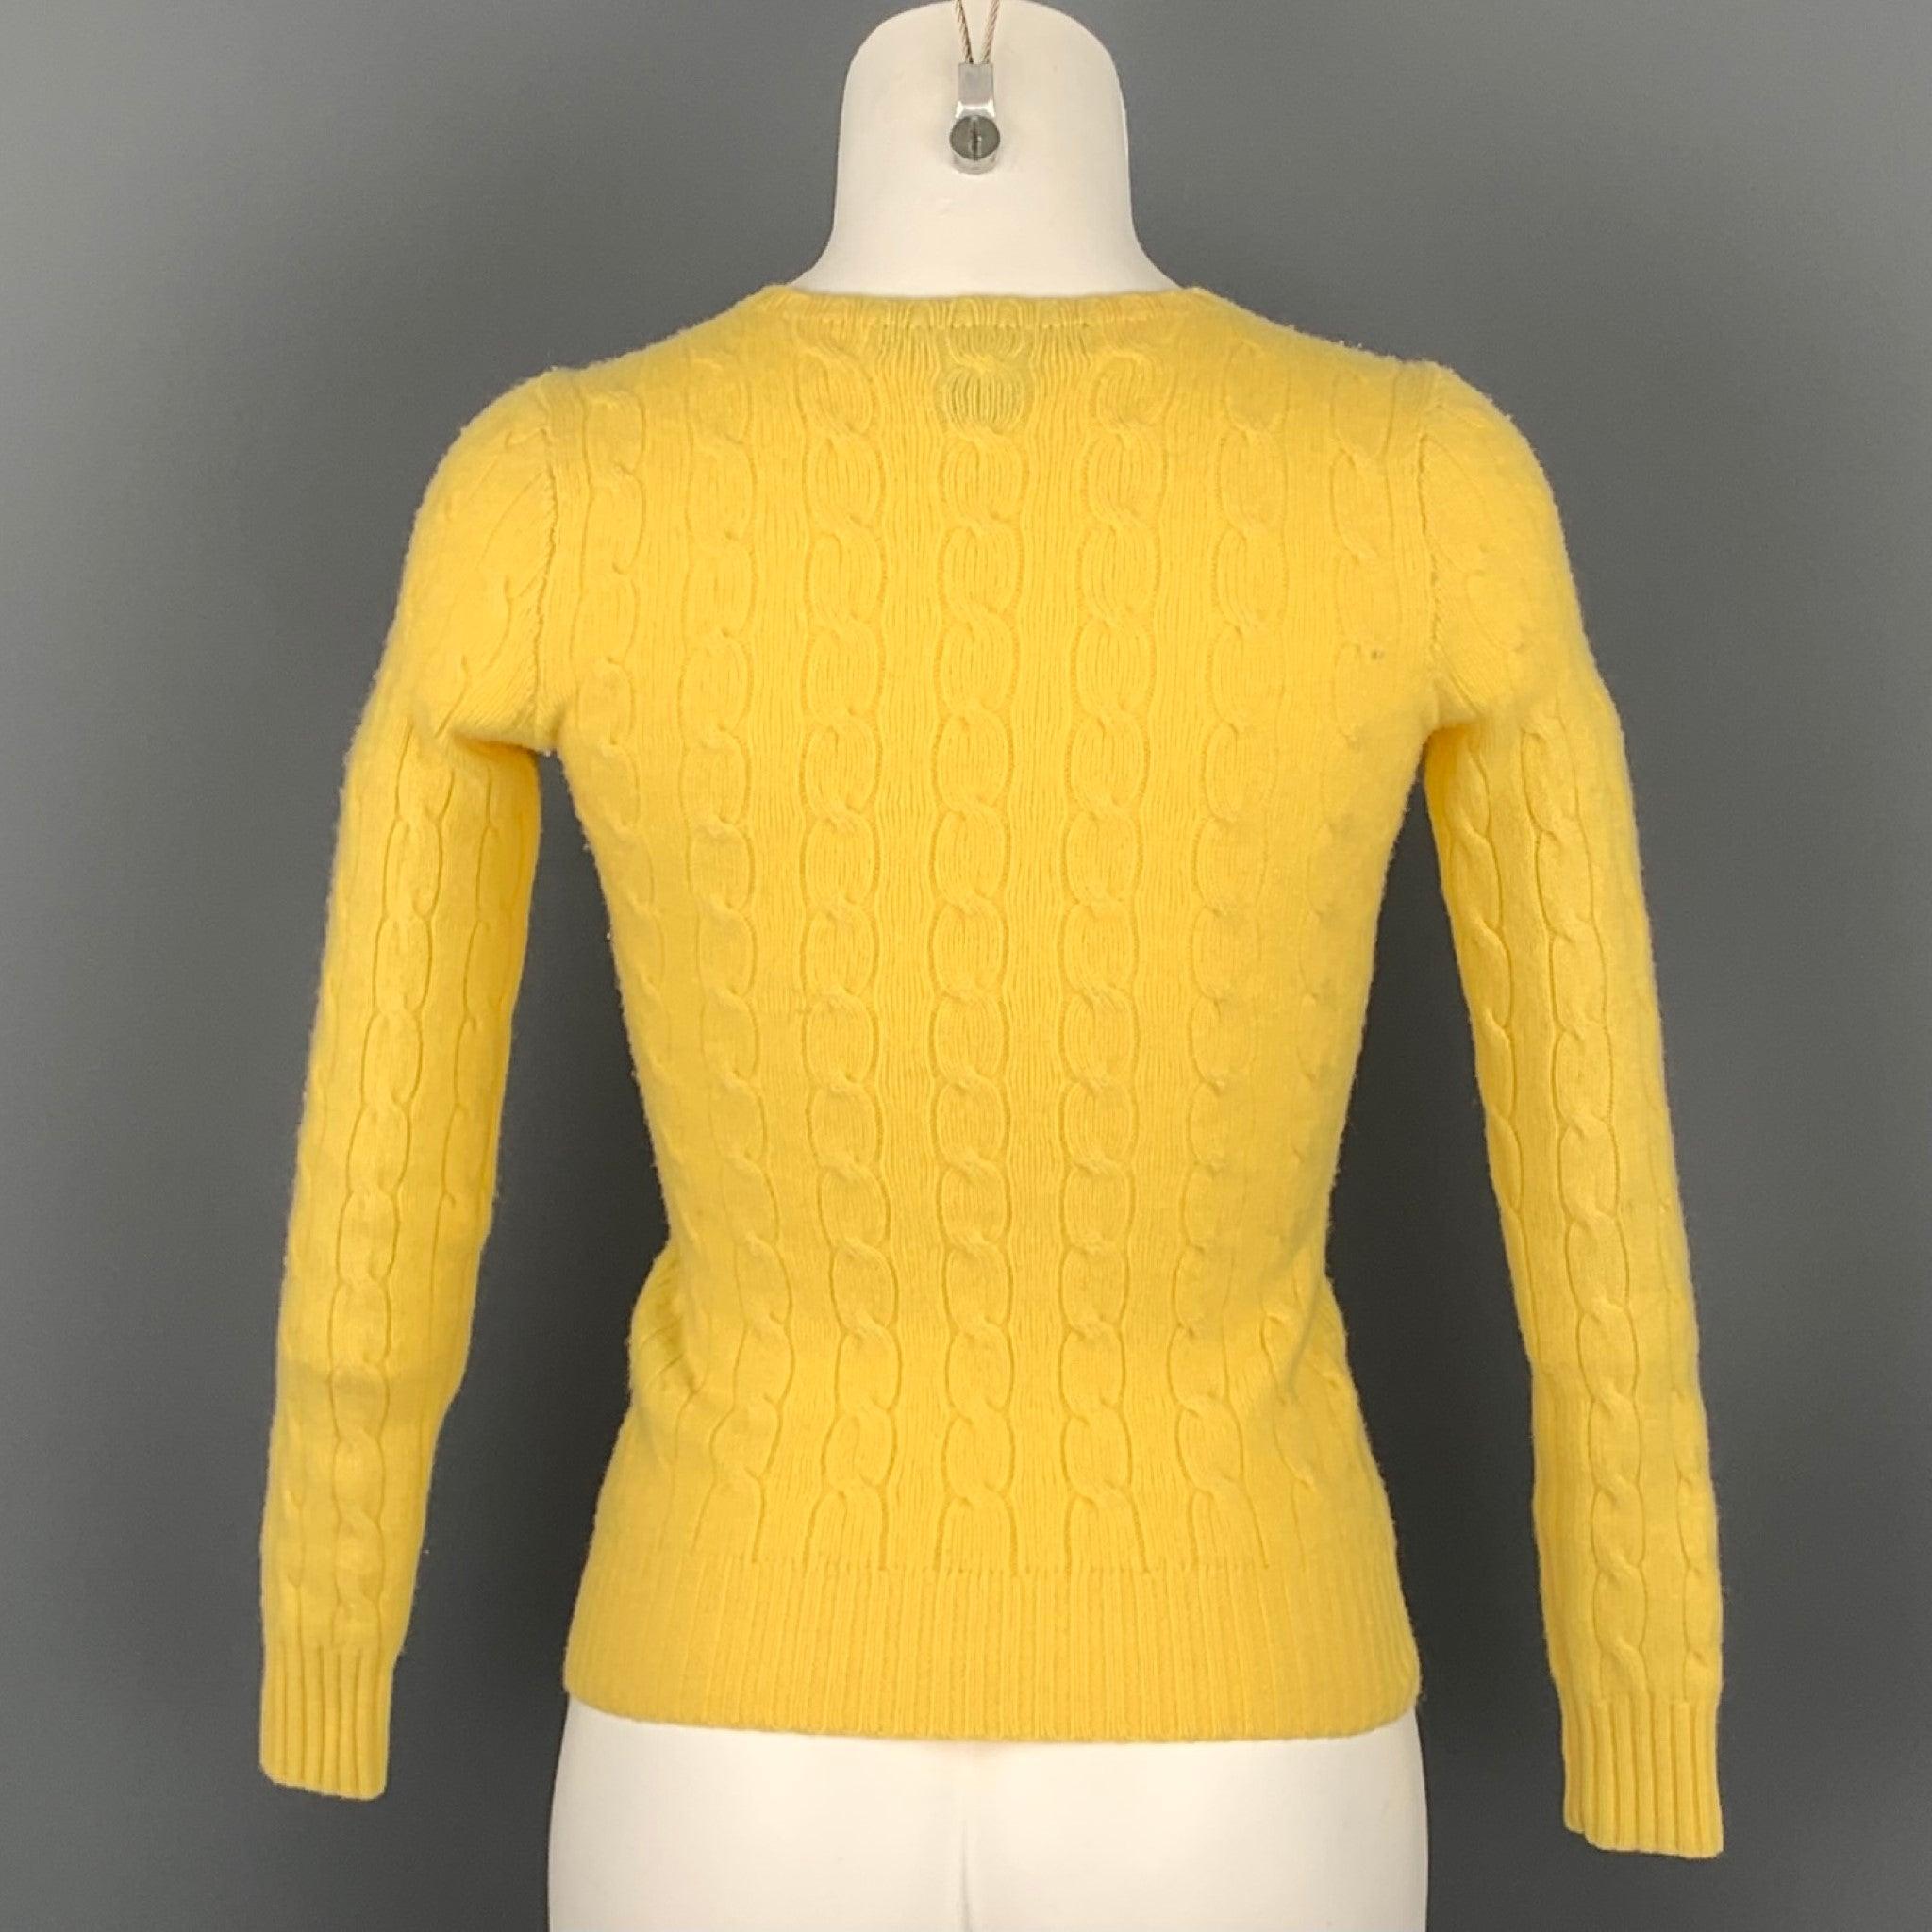 RALPH LAUREN Black Label Size S Yellow Cashmere Cable Knit Sweater In Good Condition For Sale In San Francisco, CA